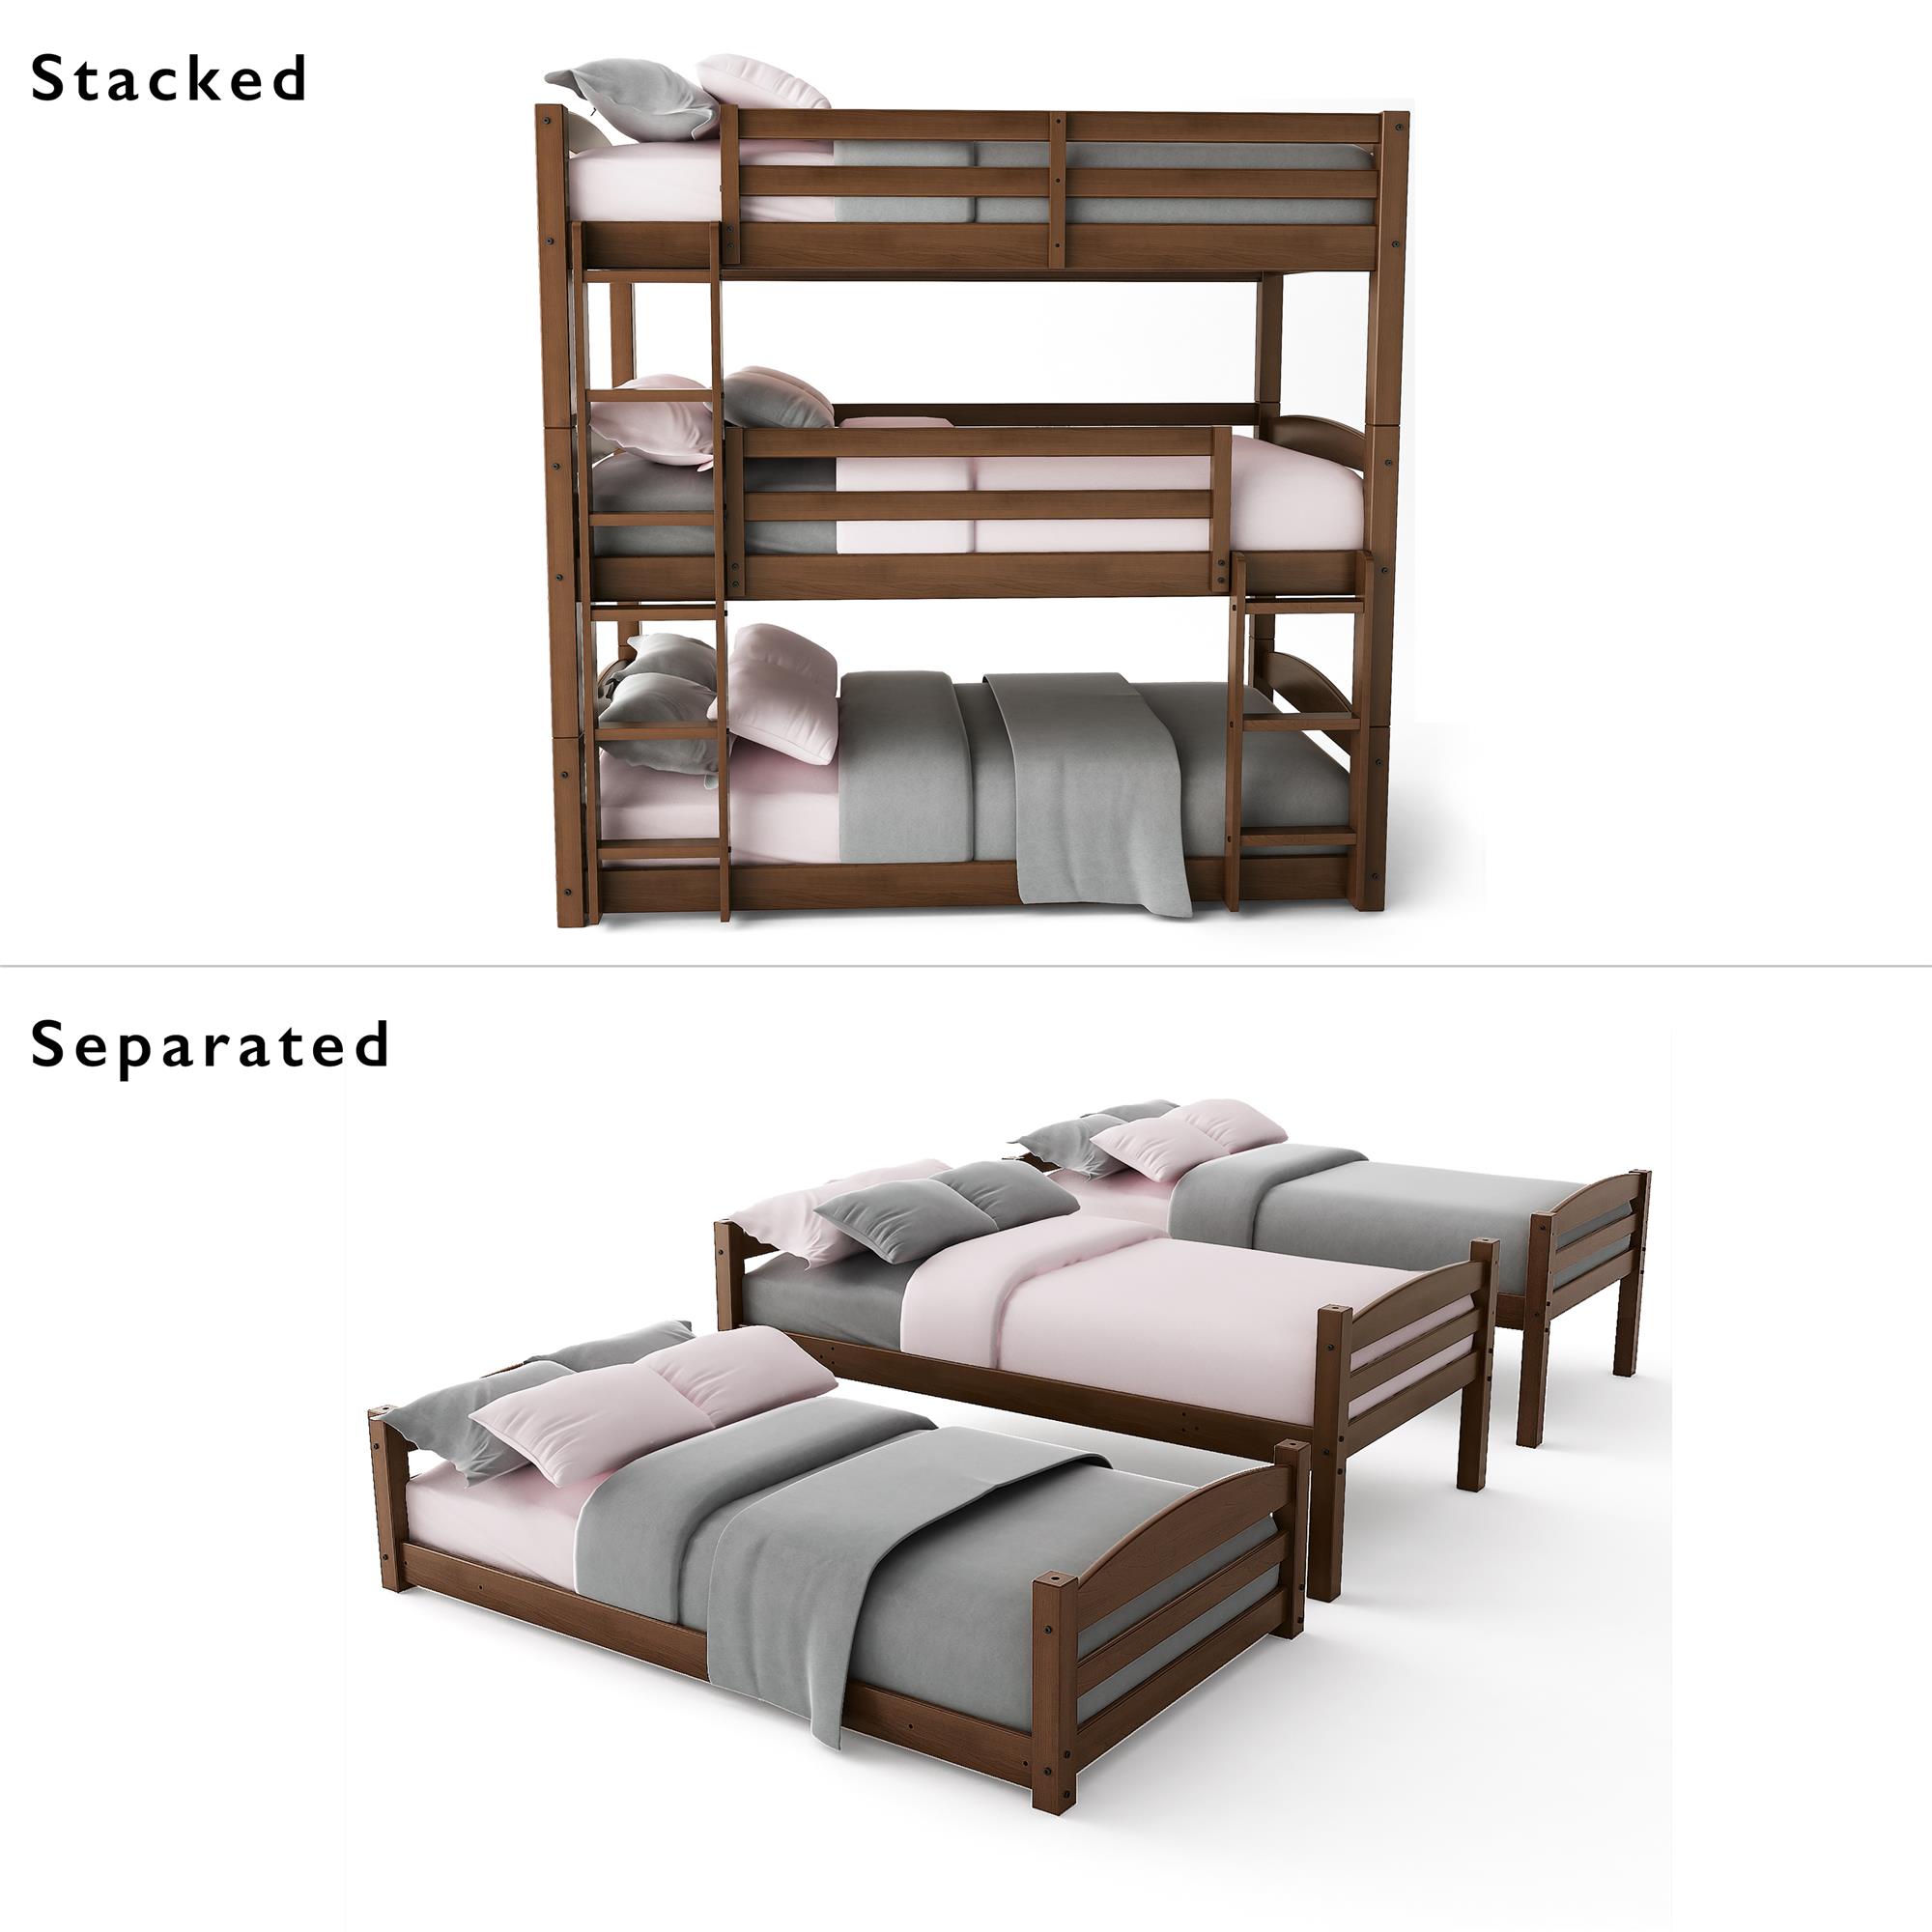 Better Homes & Gardens Tristan Kids' Convertible Triple Bunk Bed, Twin Over Twin Over Twin, Mocha - image 3 of 8